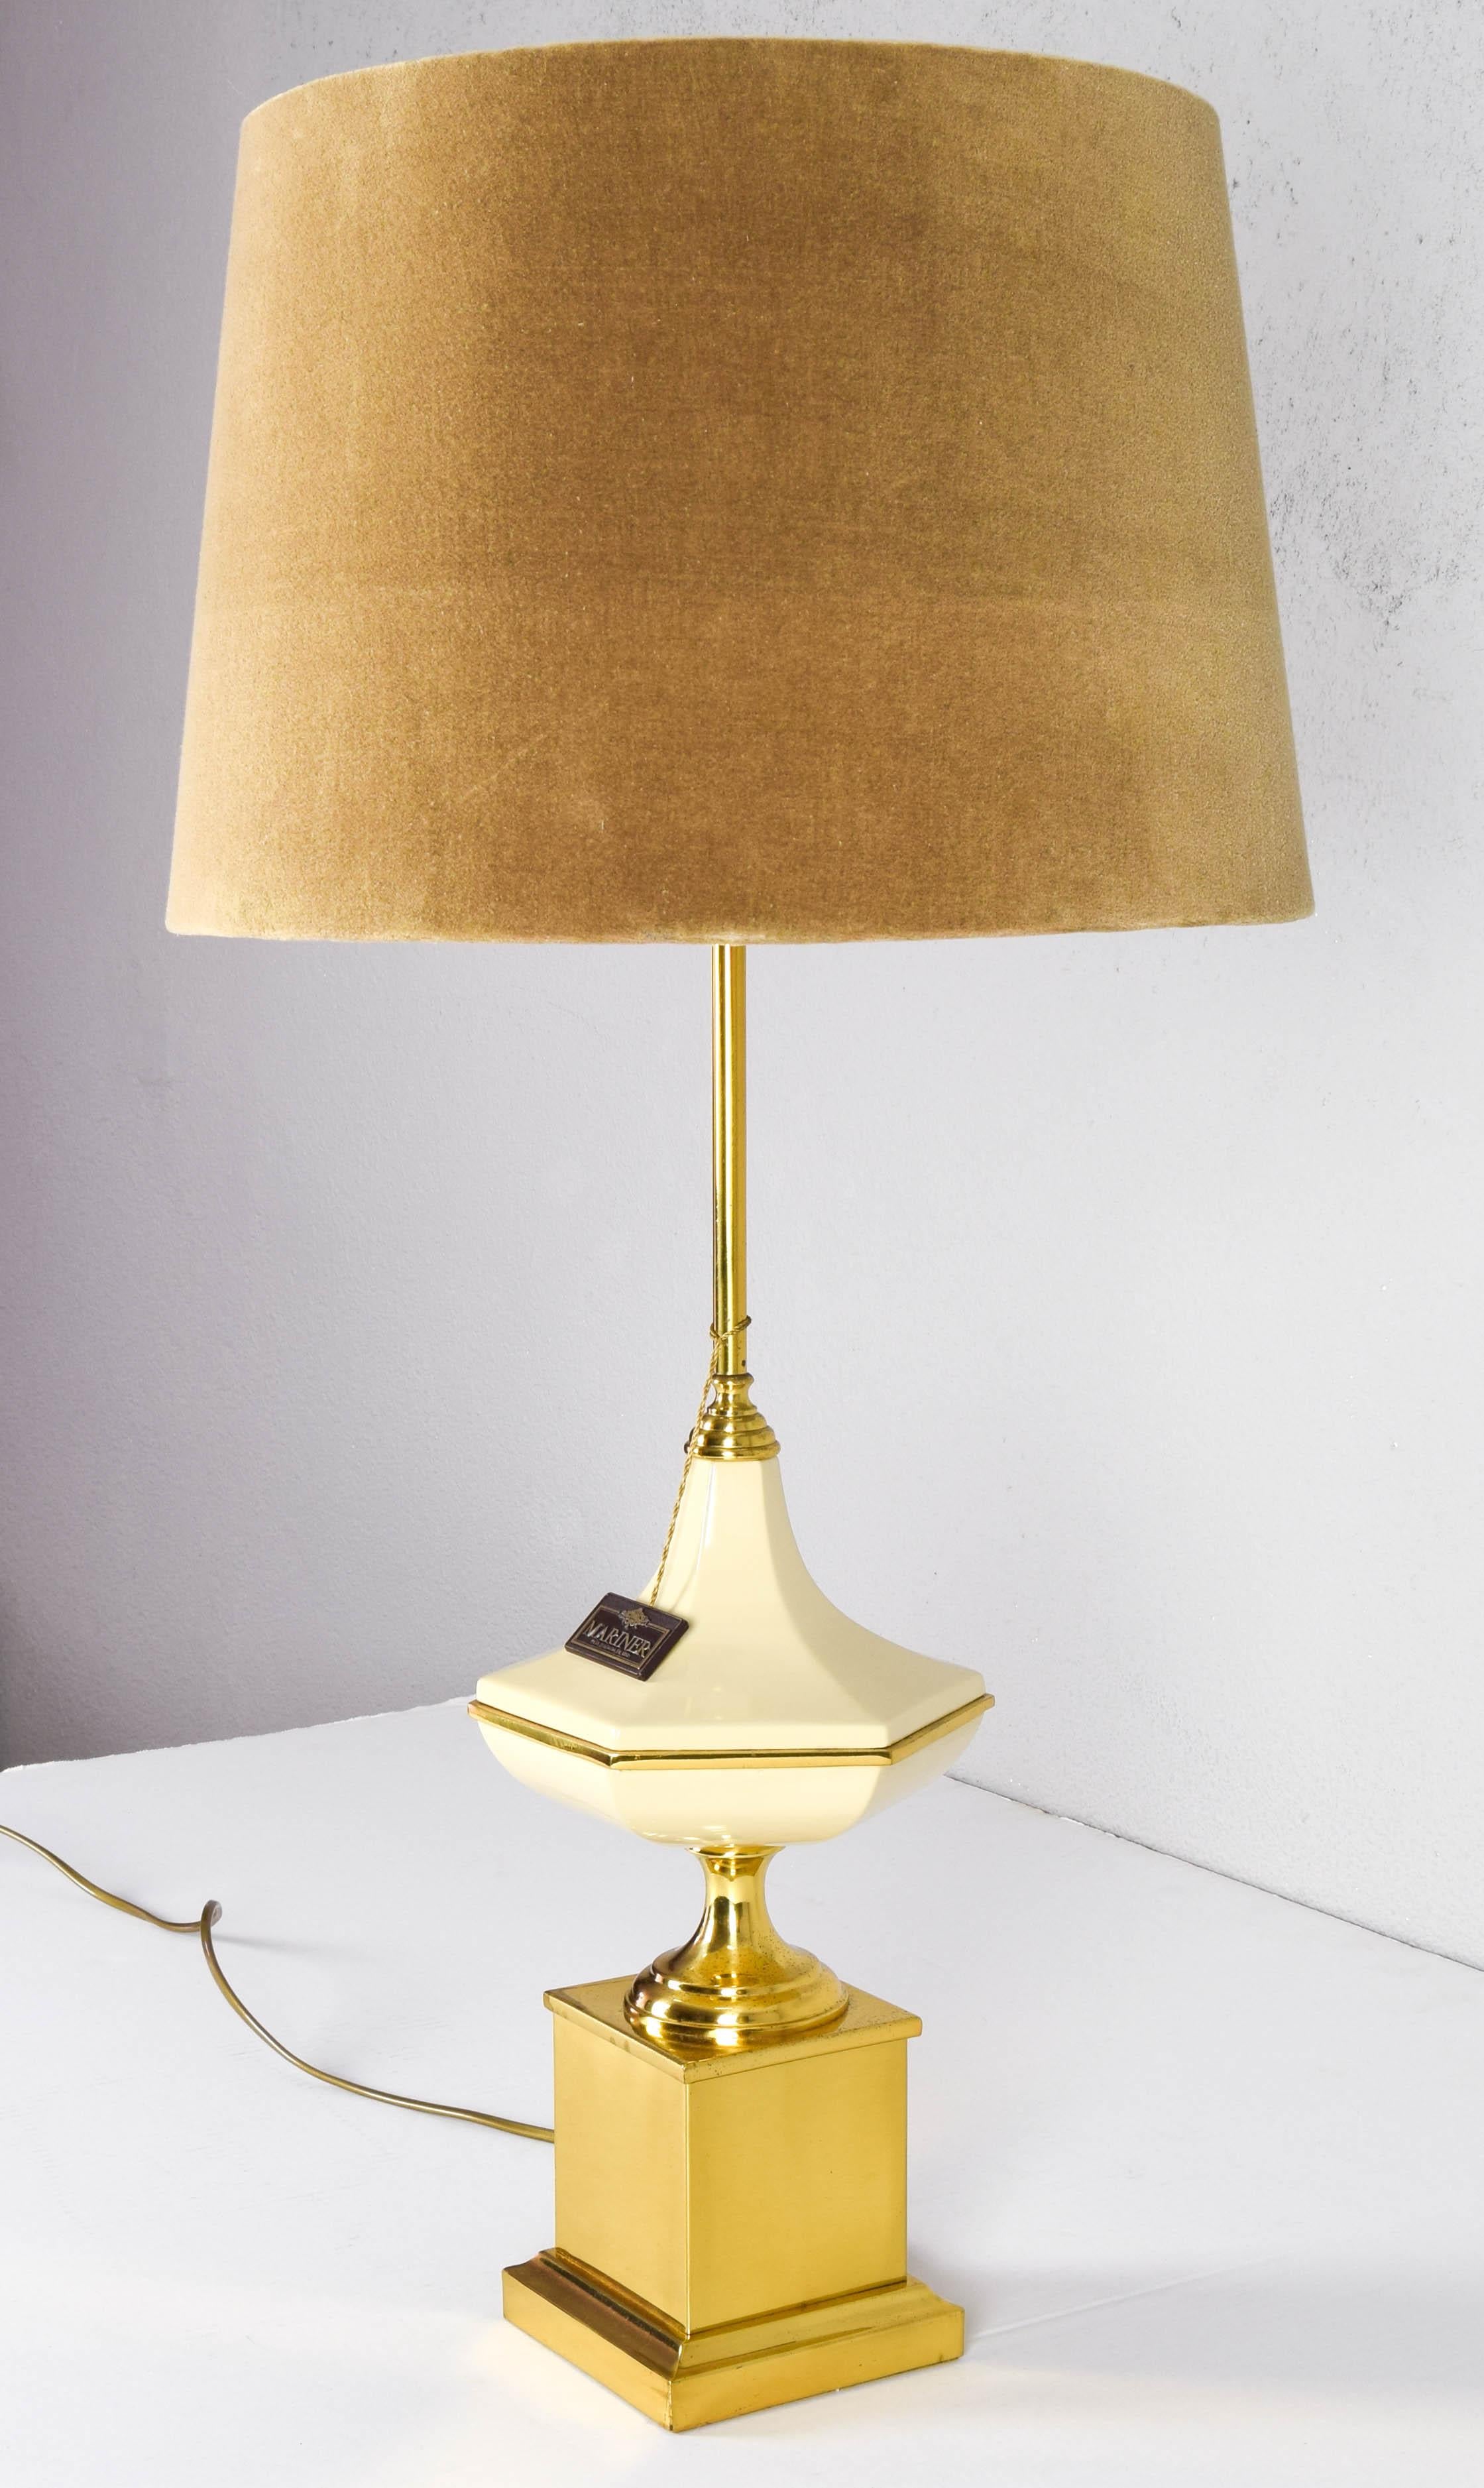 Lacquered Hollywood Regency Brass Mariner Table Lamp Mid Century, Spain 70s For Sale